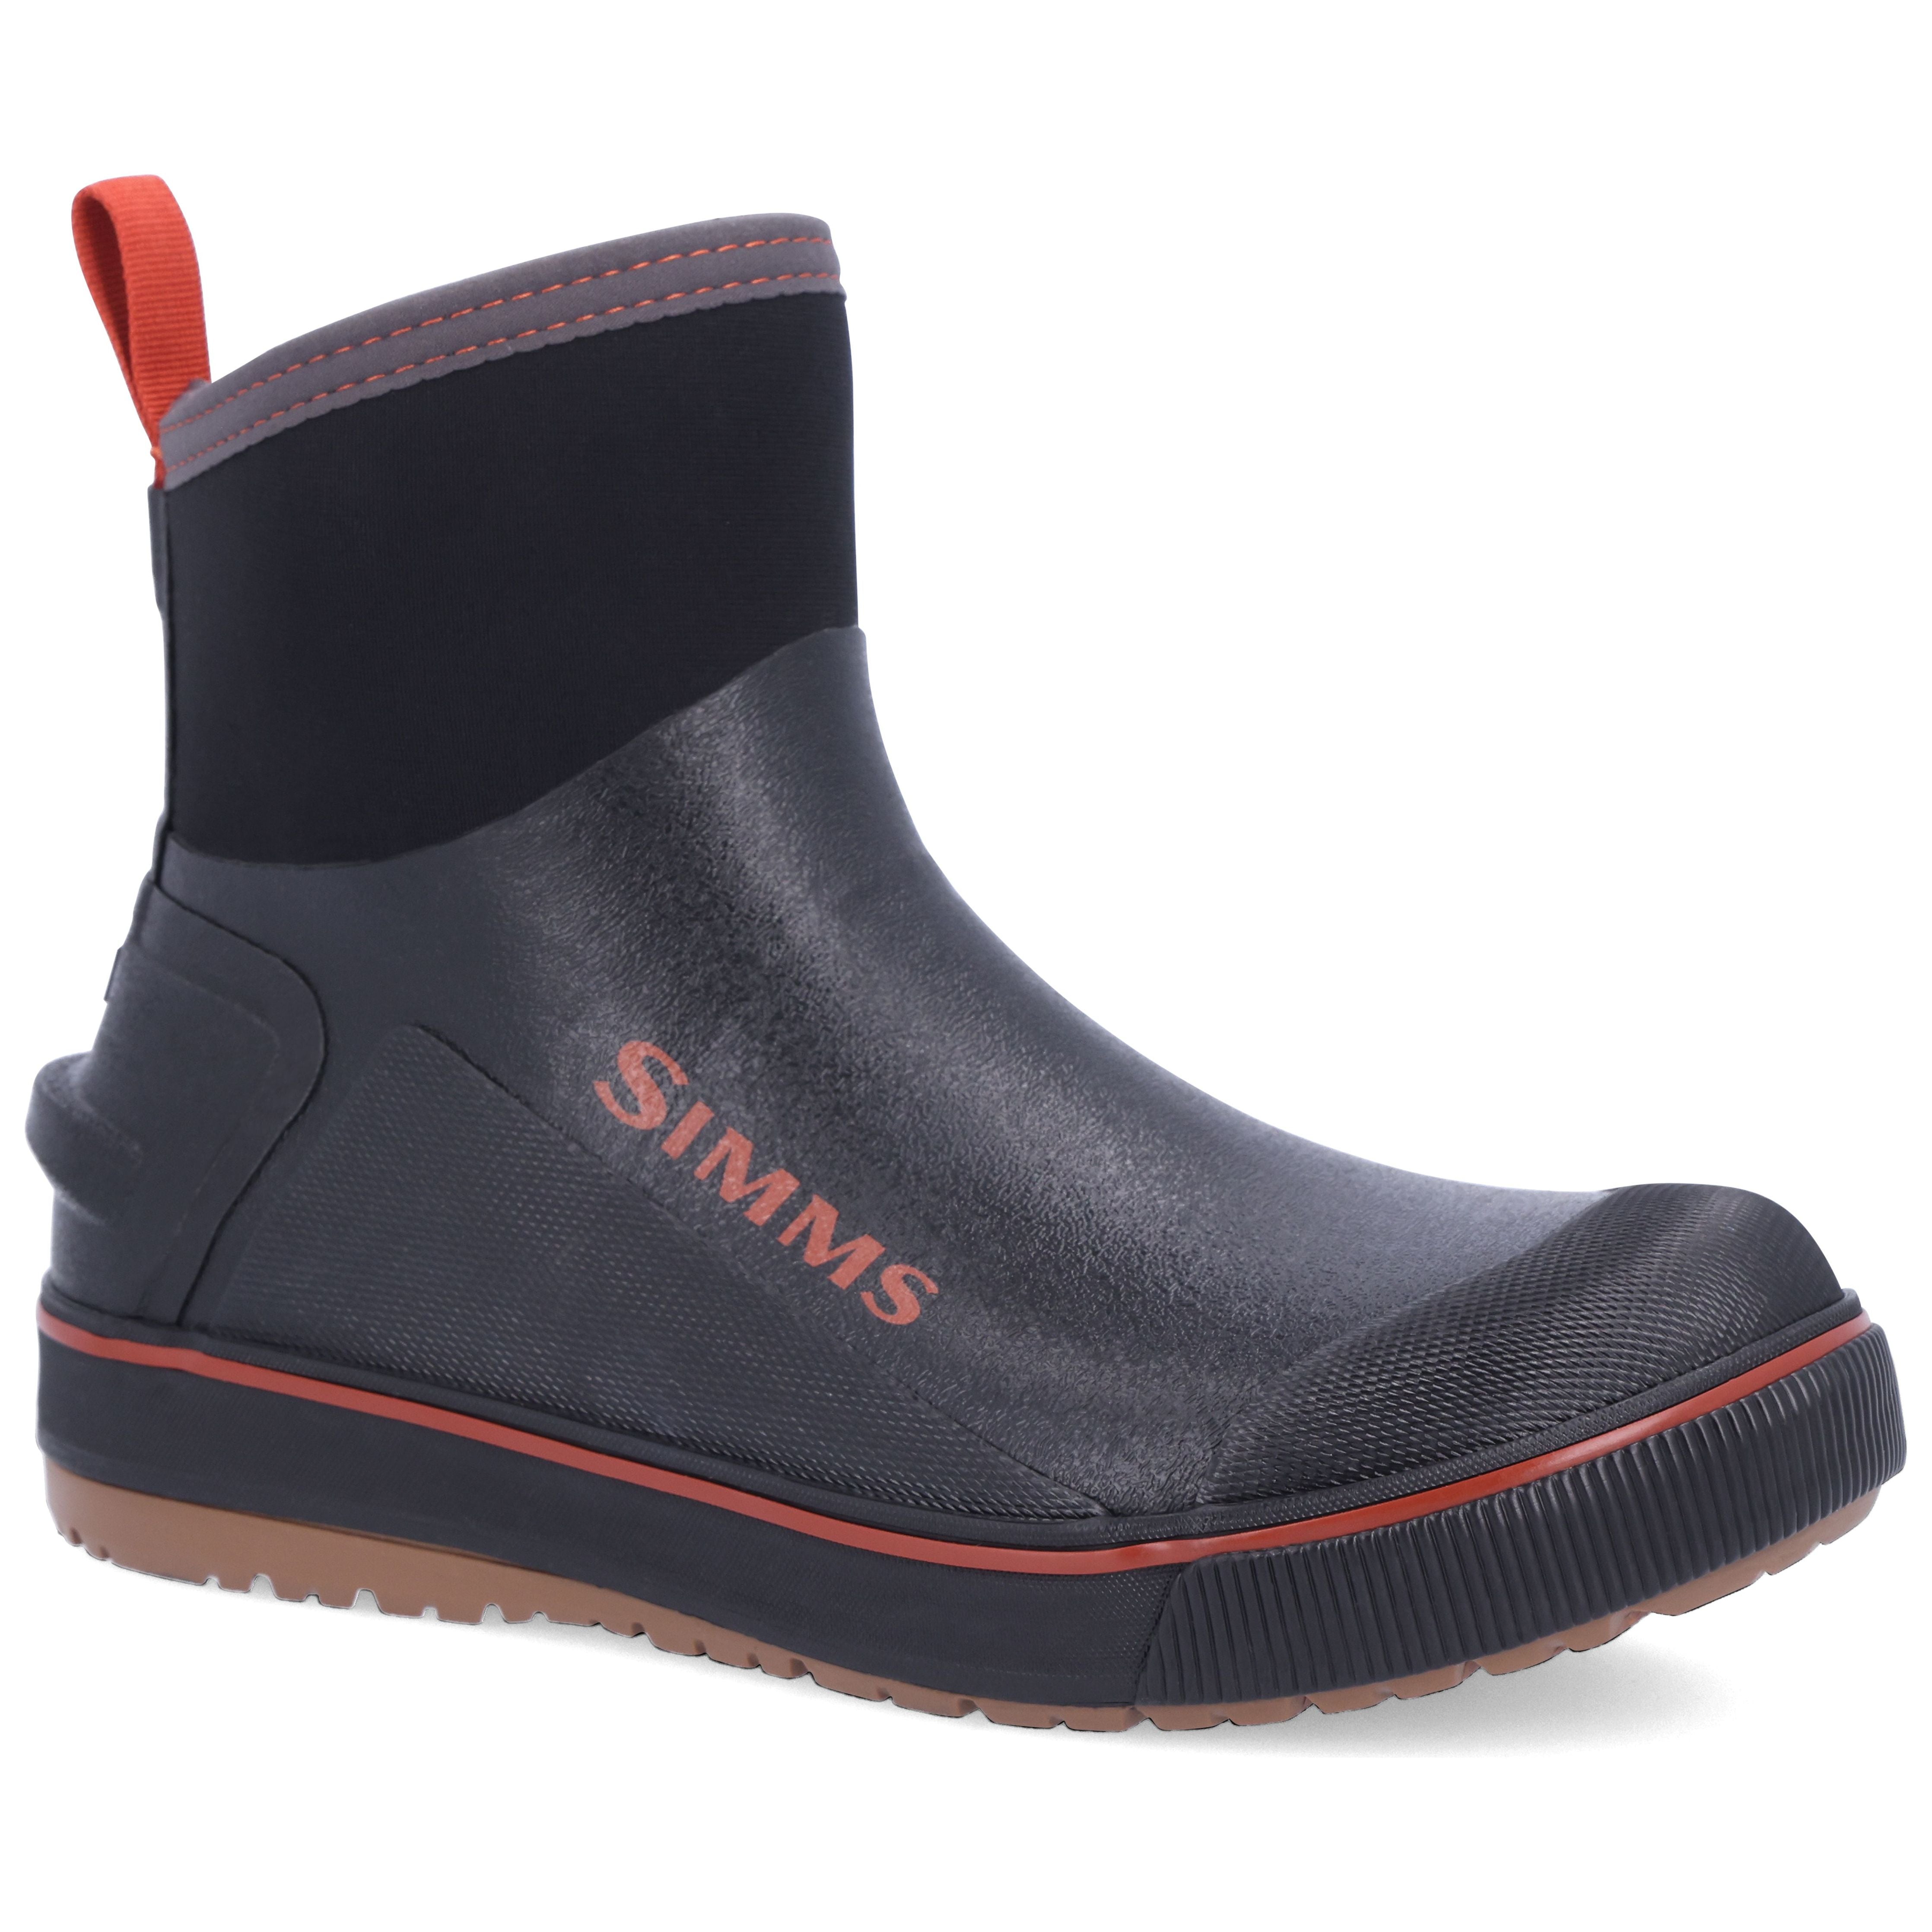 Simms Challenger 7" Boot Black Image 01